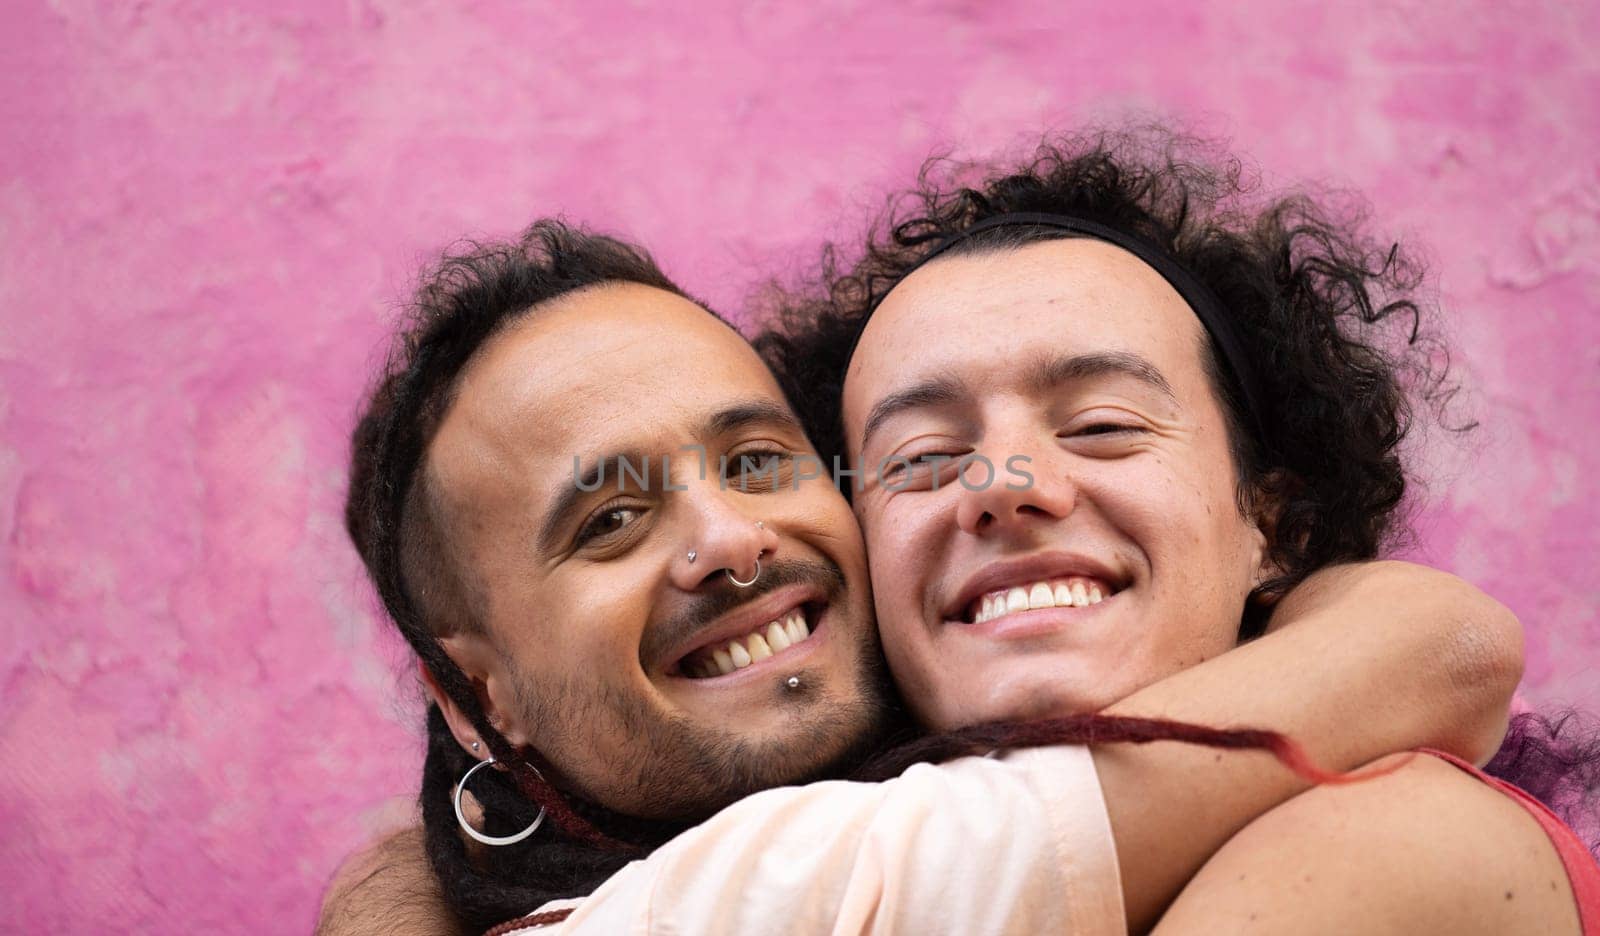 Close up headshot of two gay men lovers hug each other with smiles on their faces isolated on pink background.